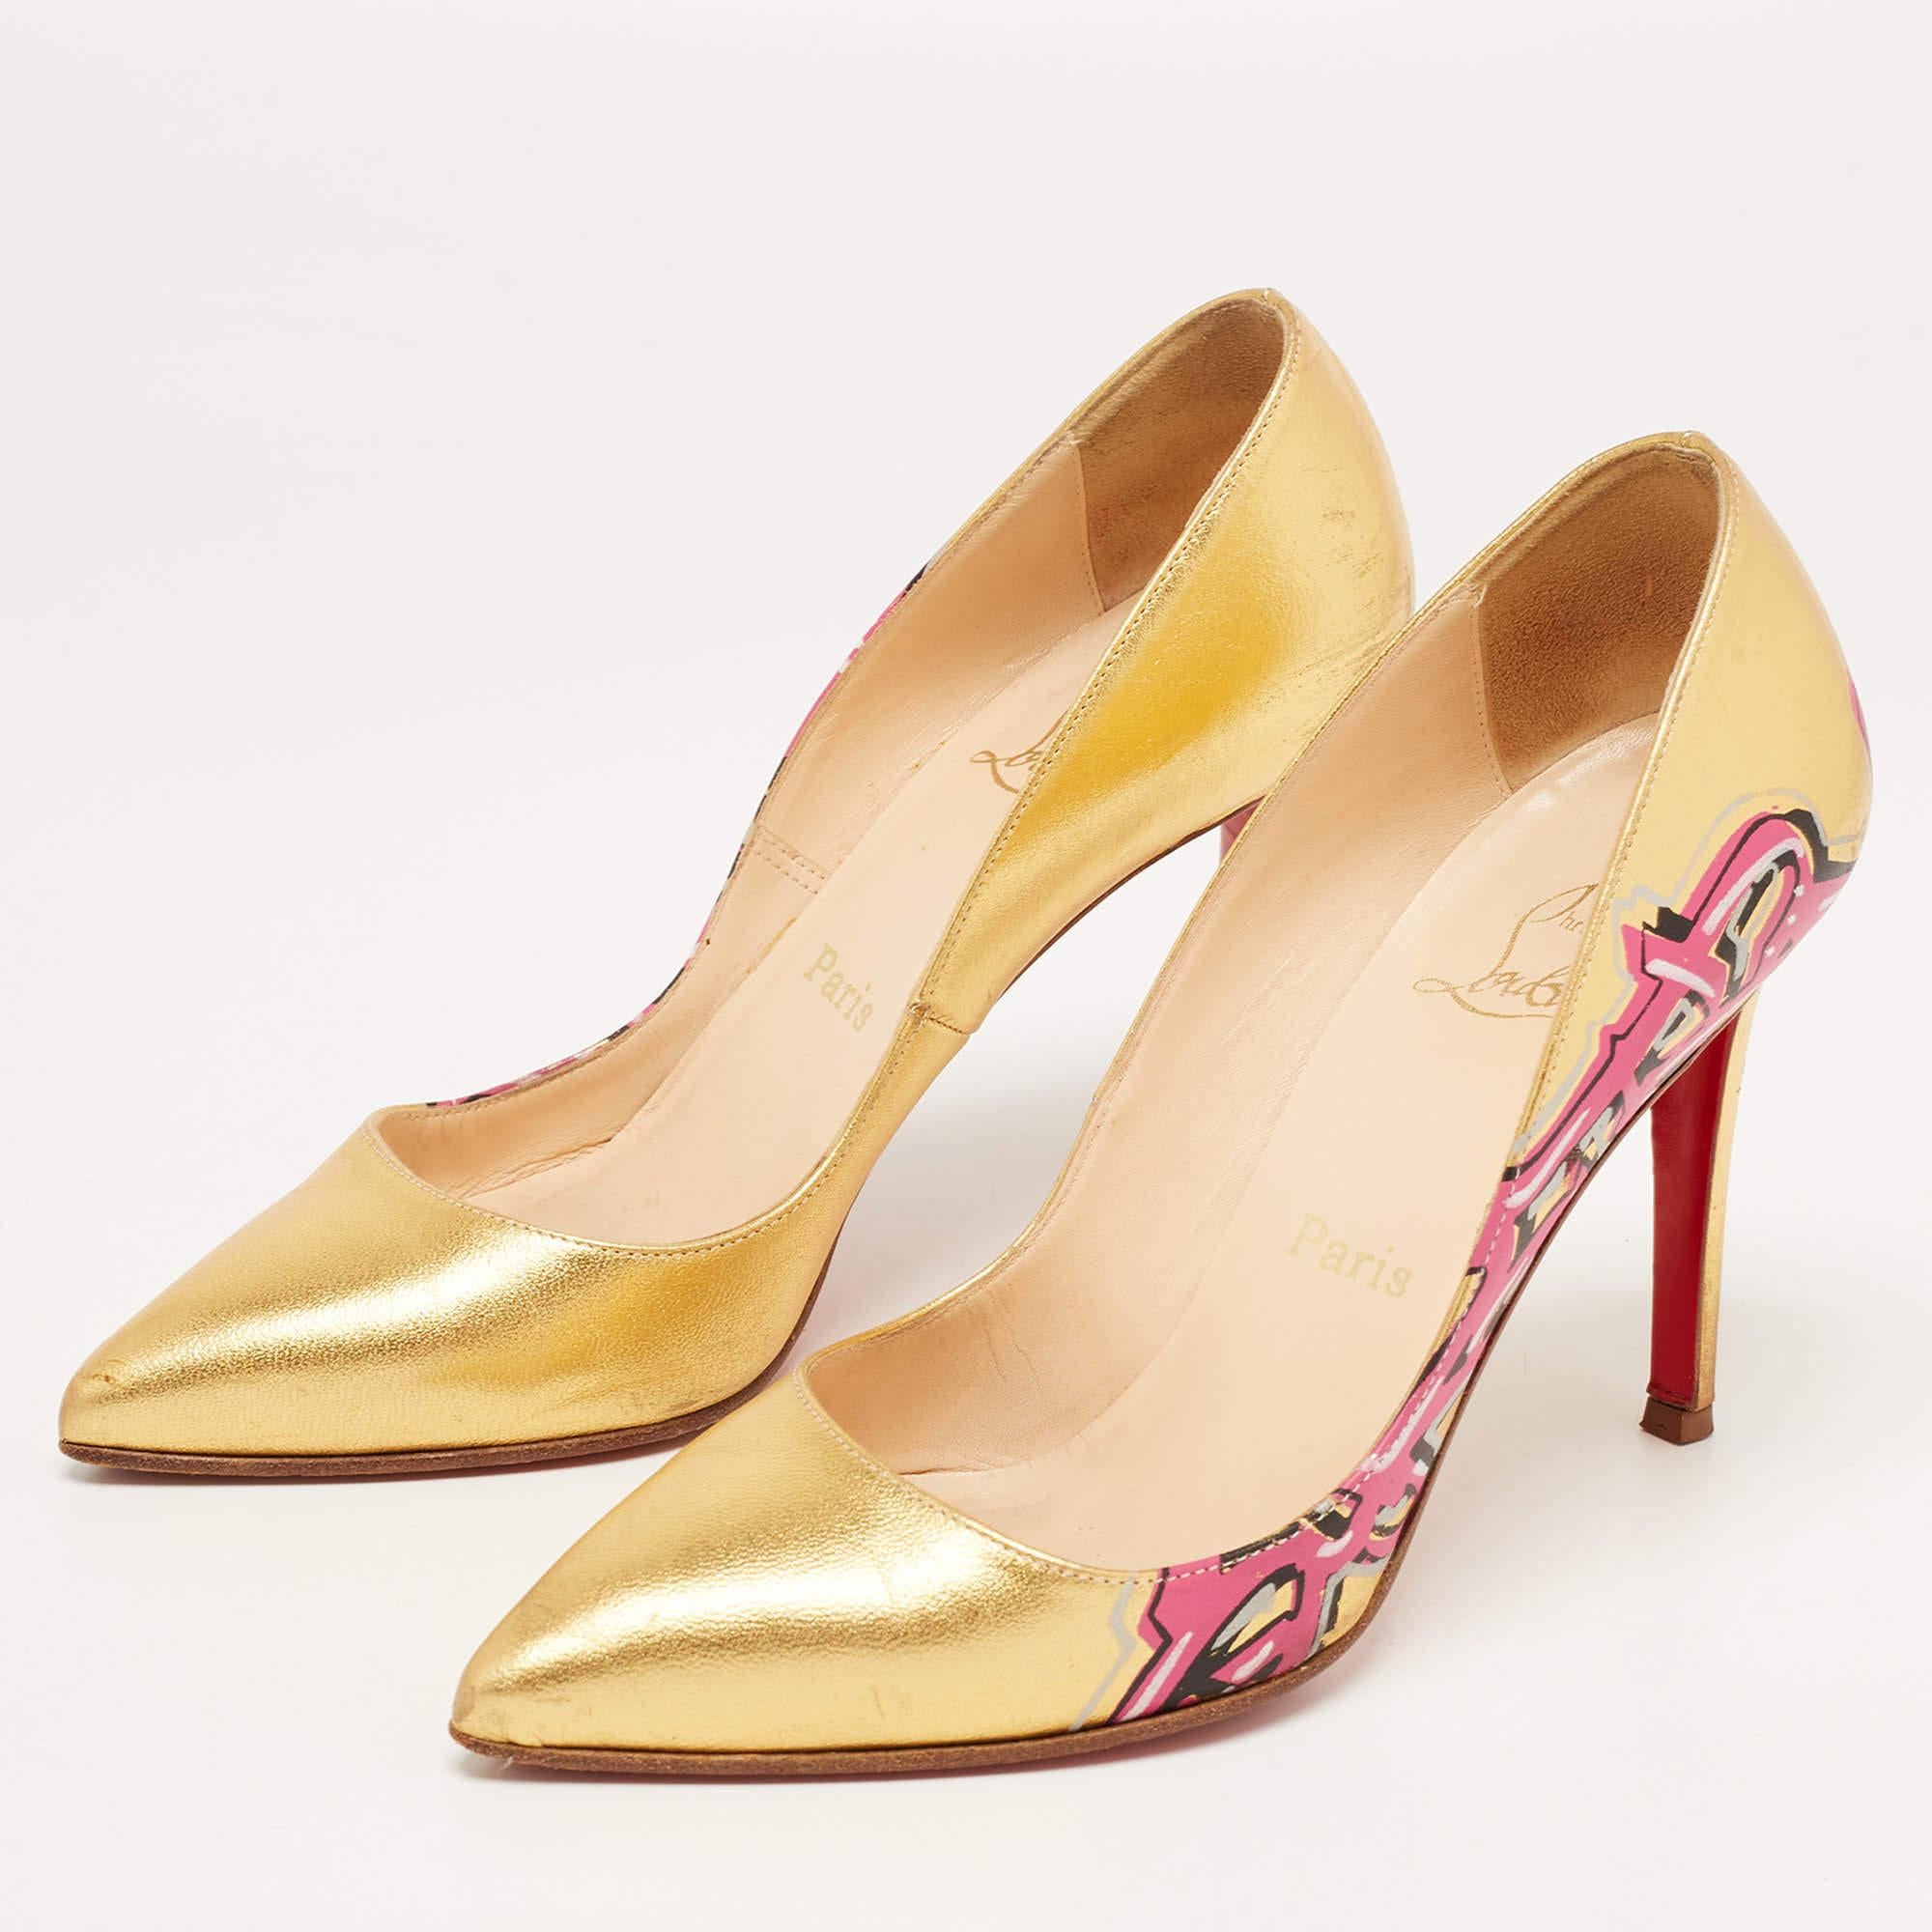 The architectural silhouette and contemporary design of this pair of Christian Louboutin pumps exemplify the brand's mastery in the art of stiletto making. Finely created from gold leather, it stands elegantly on 10cm heels and is decorated with